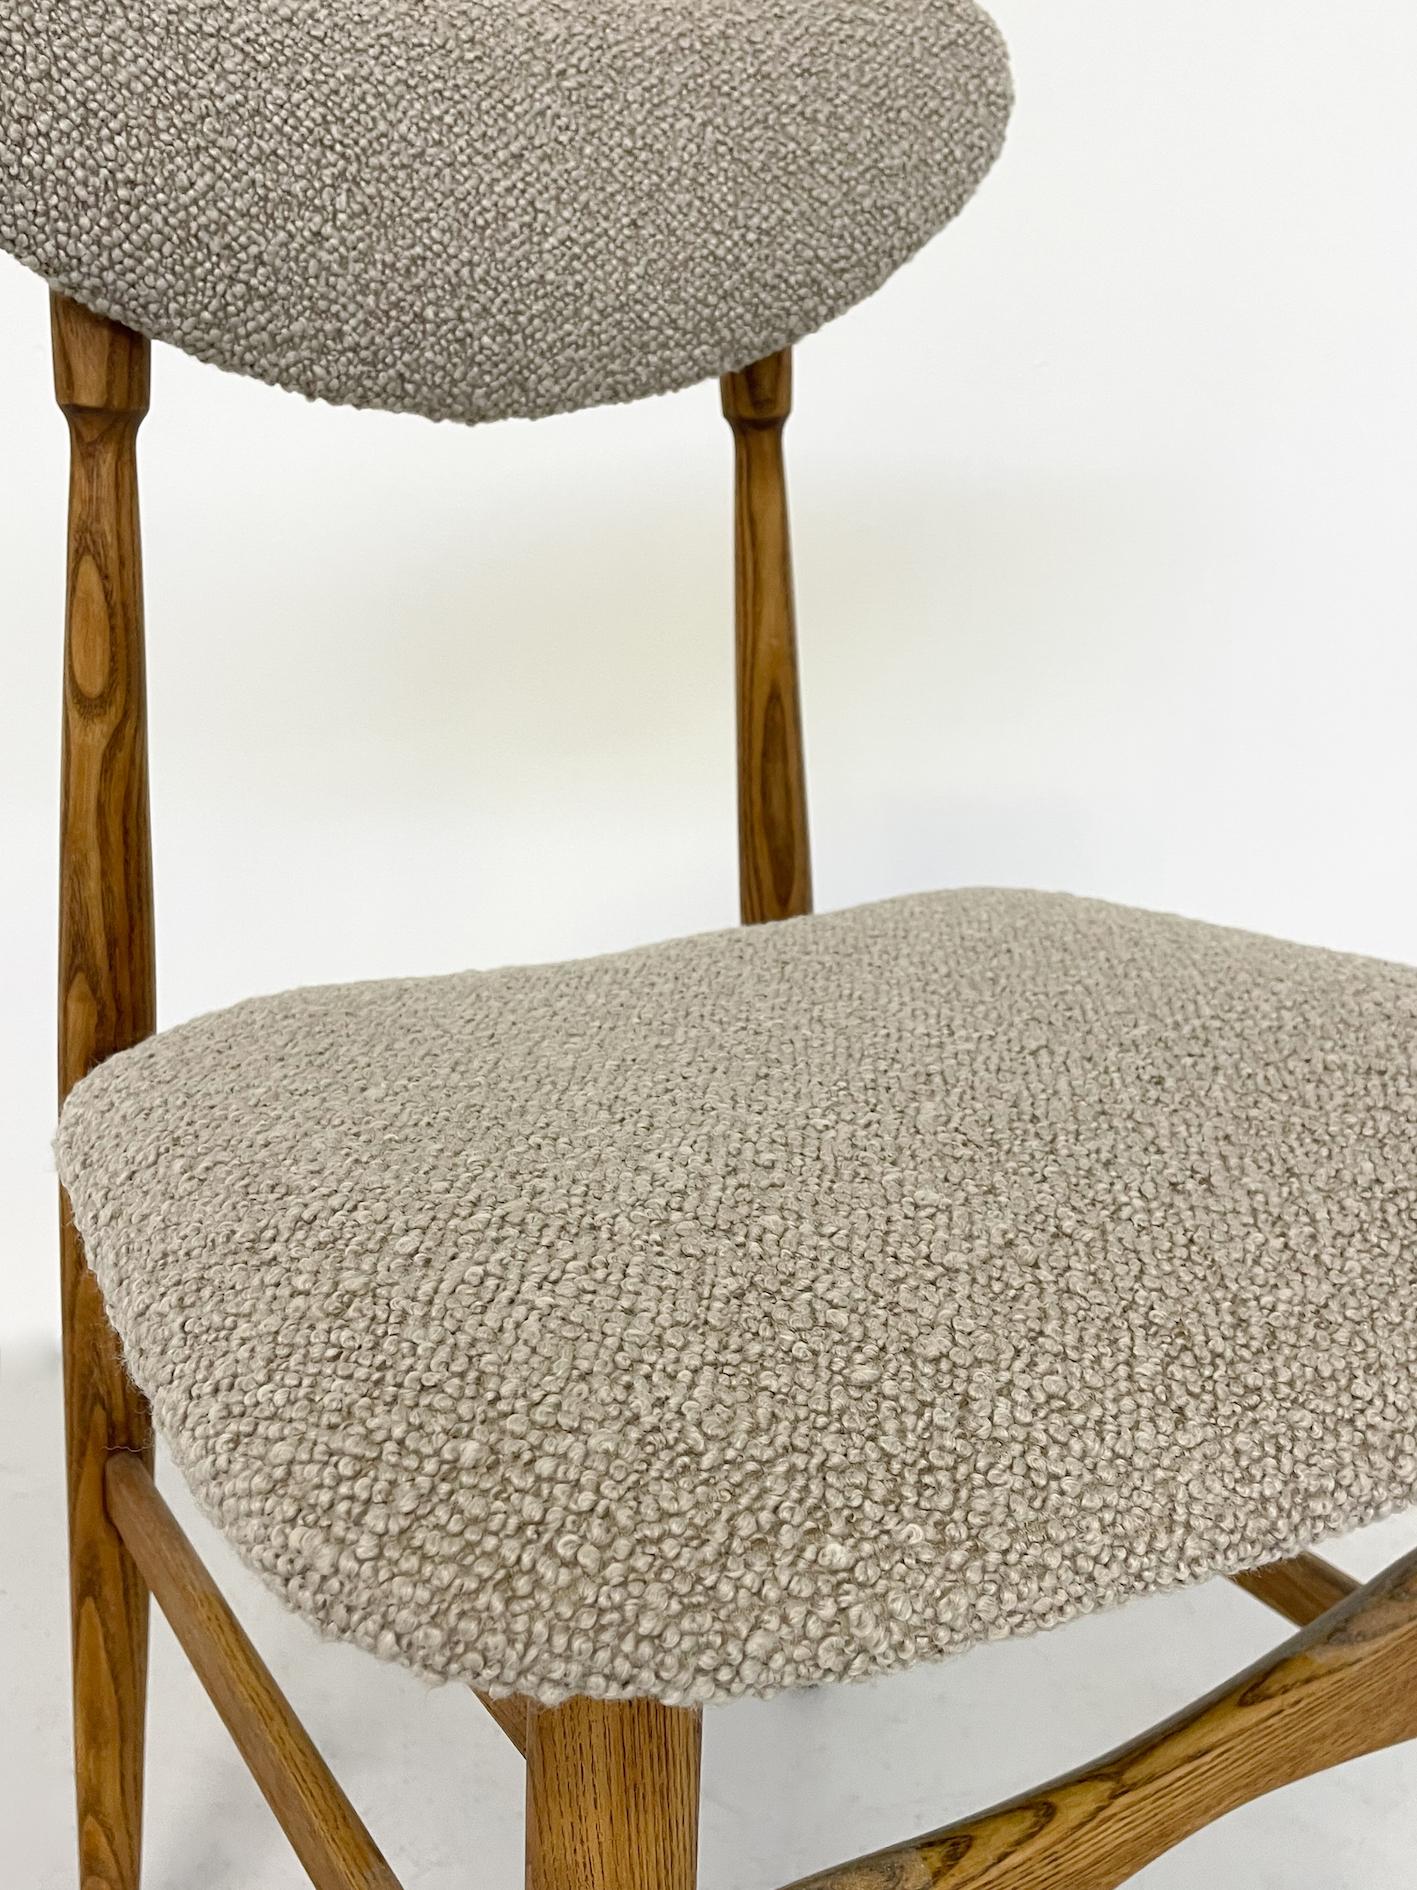 The Modernity Set of 12 Chairs, Italie, 1960s - New Upholstery en vente 2